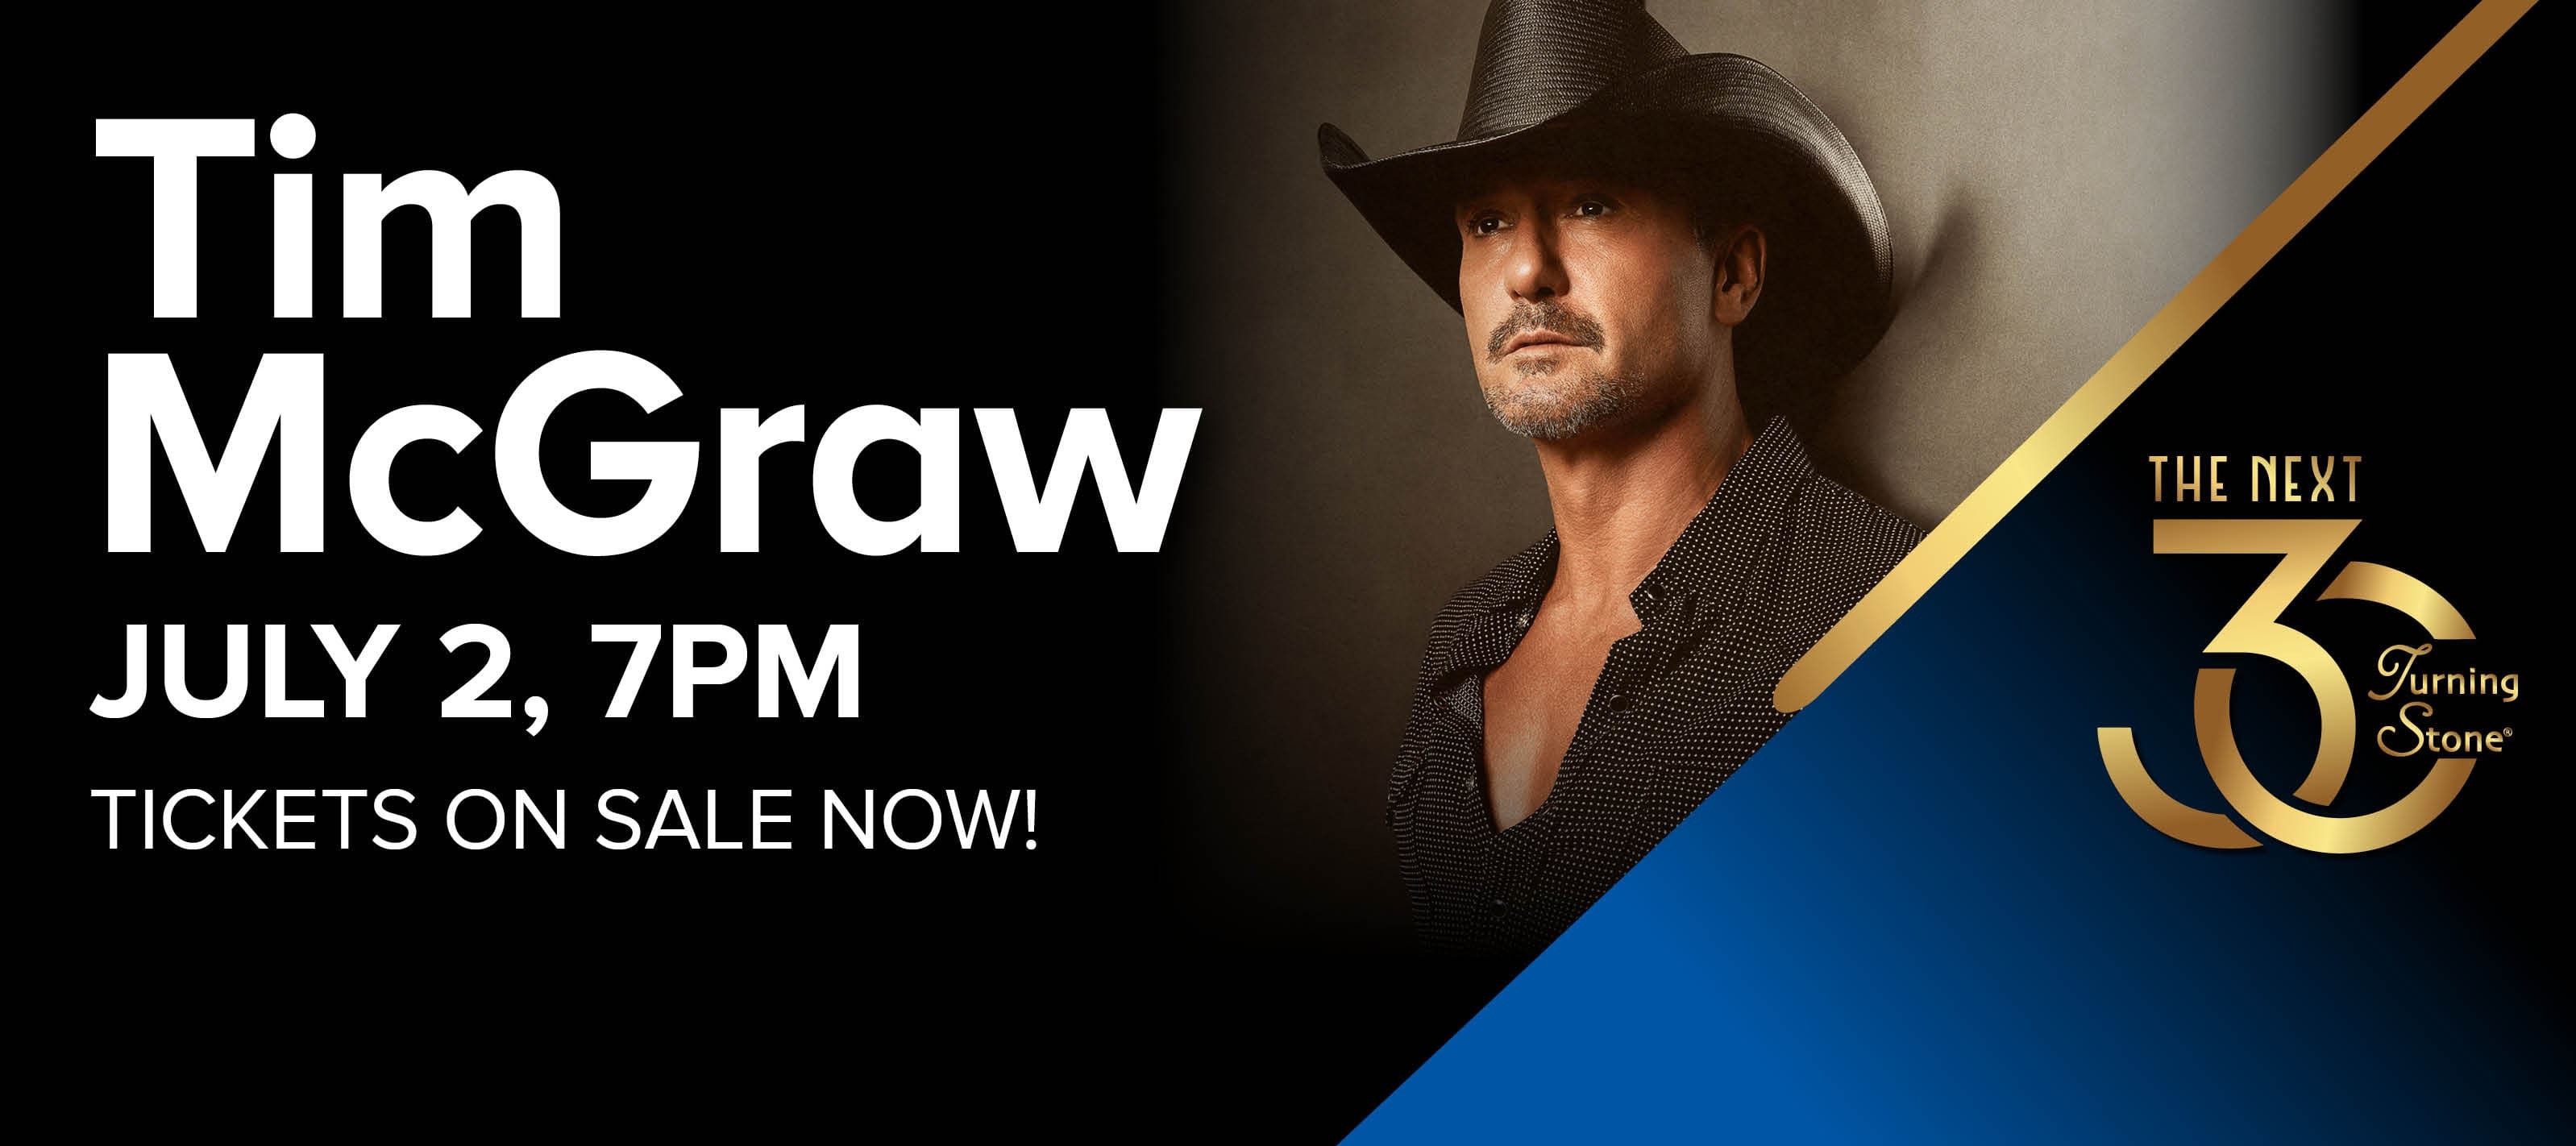 Tim McGraw July 2 7pm Tickets On Sale Now